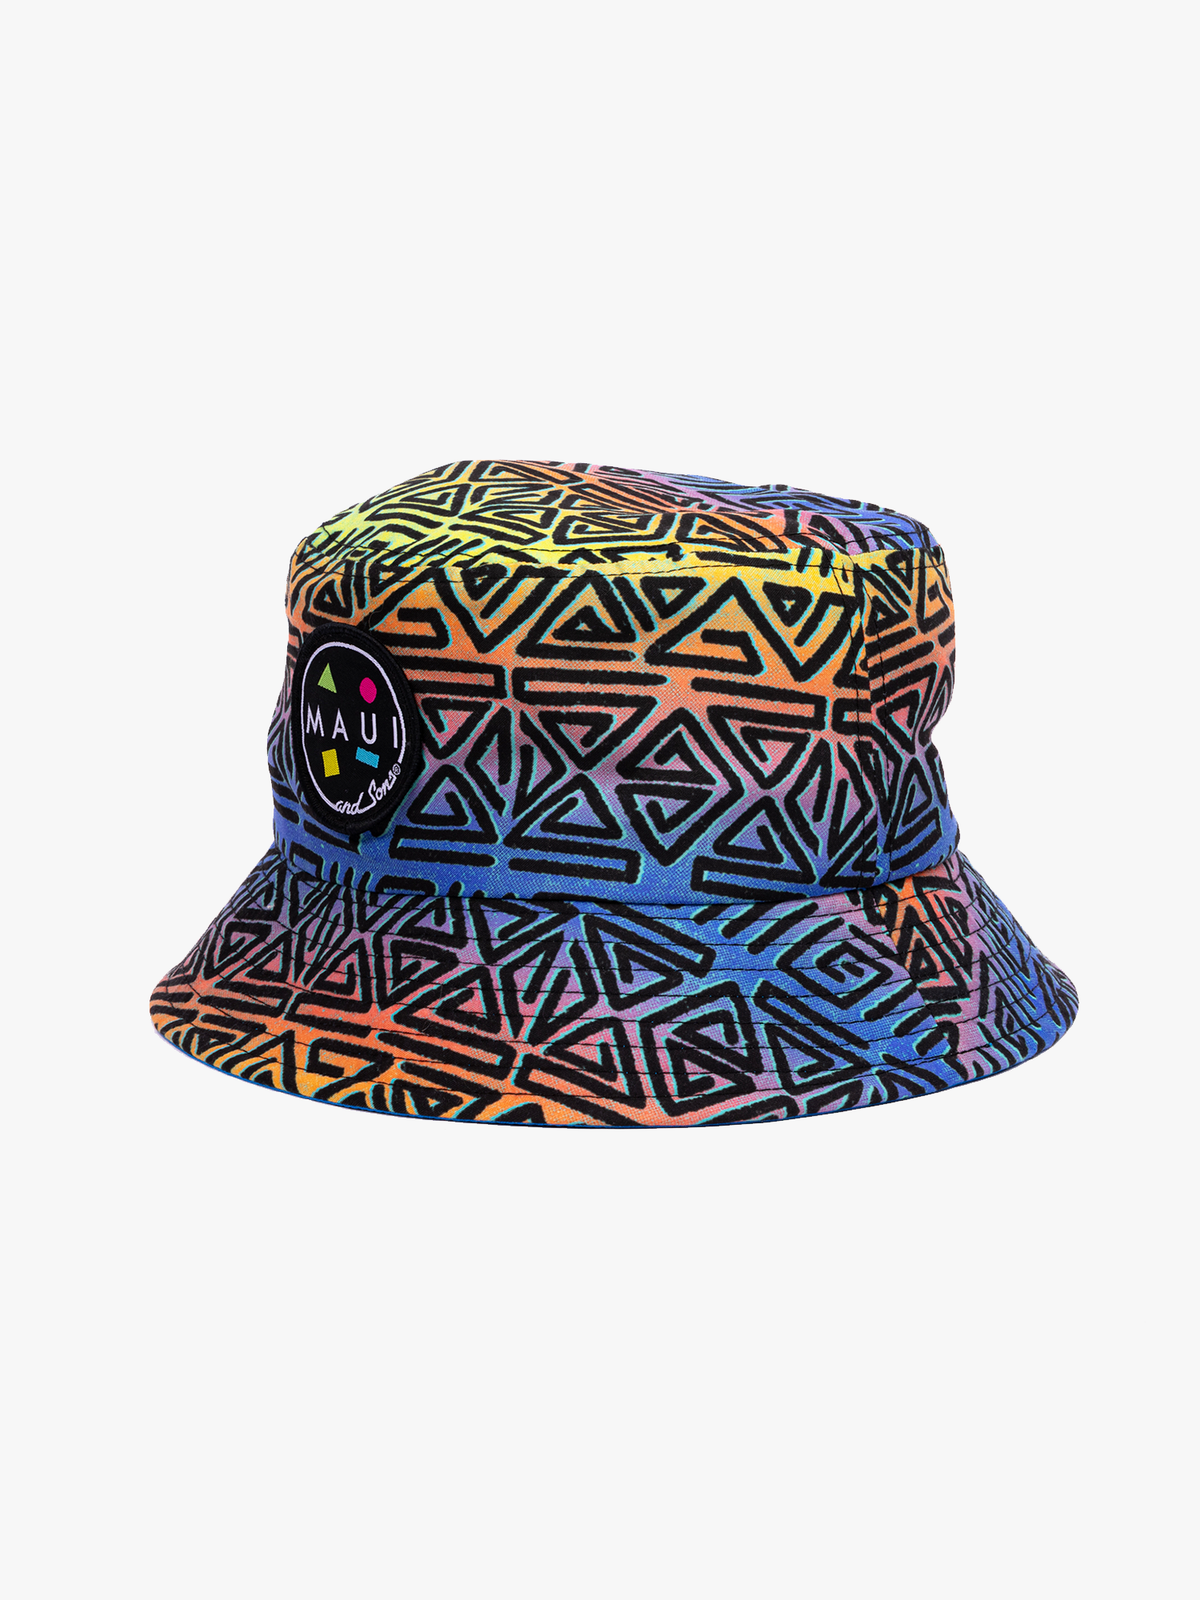 Feel Good Bucket Hat | Sons Maui and